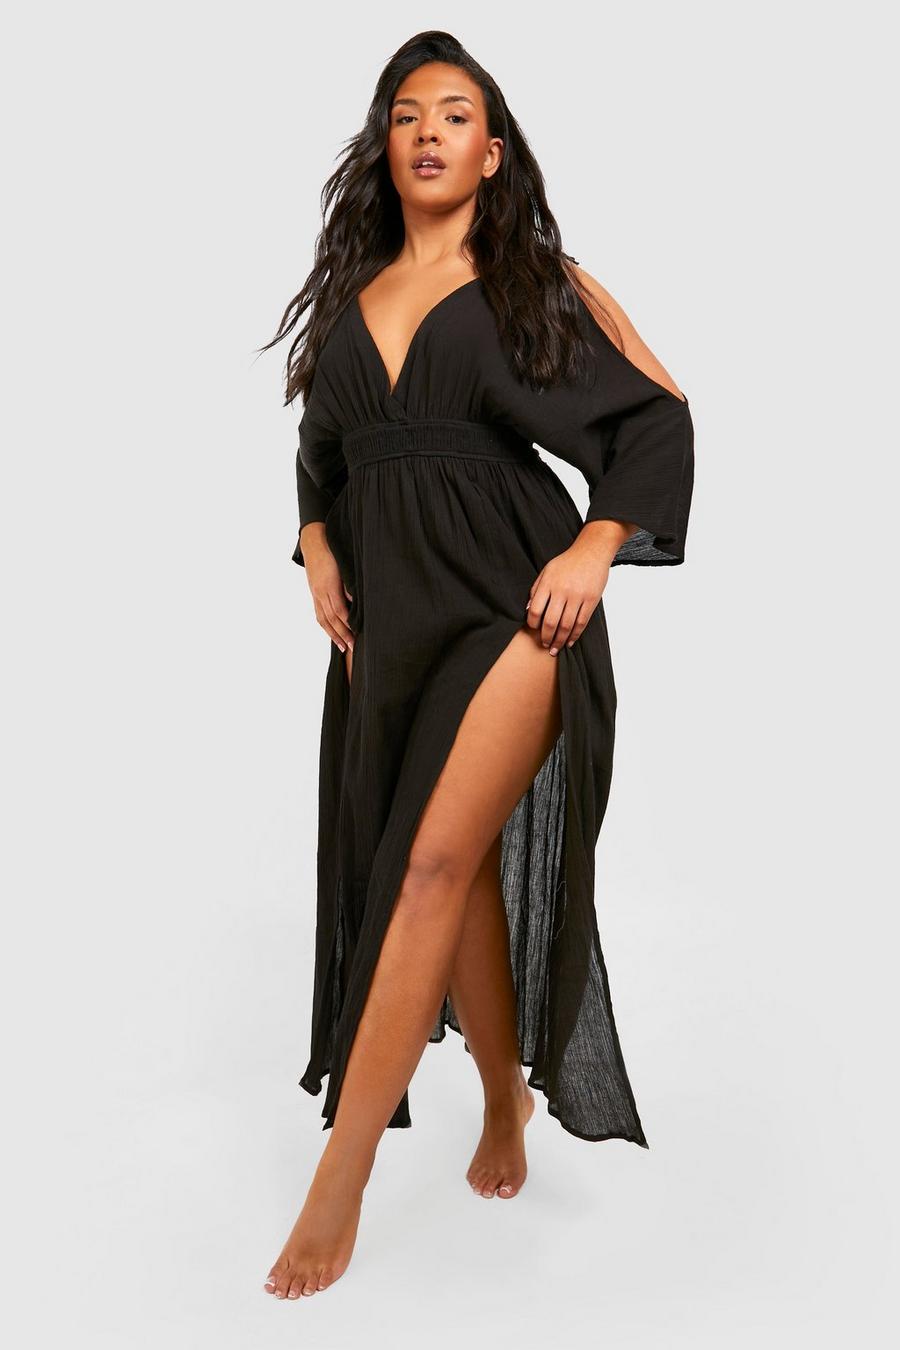 Brutal Fabrikant stille Women's Plus Cheesecloth Cold Shoulder Maxi Beach Dress | Boohoo UK